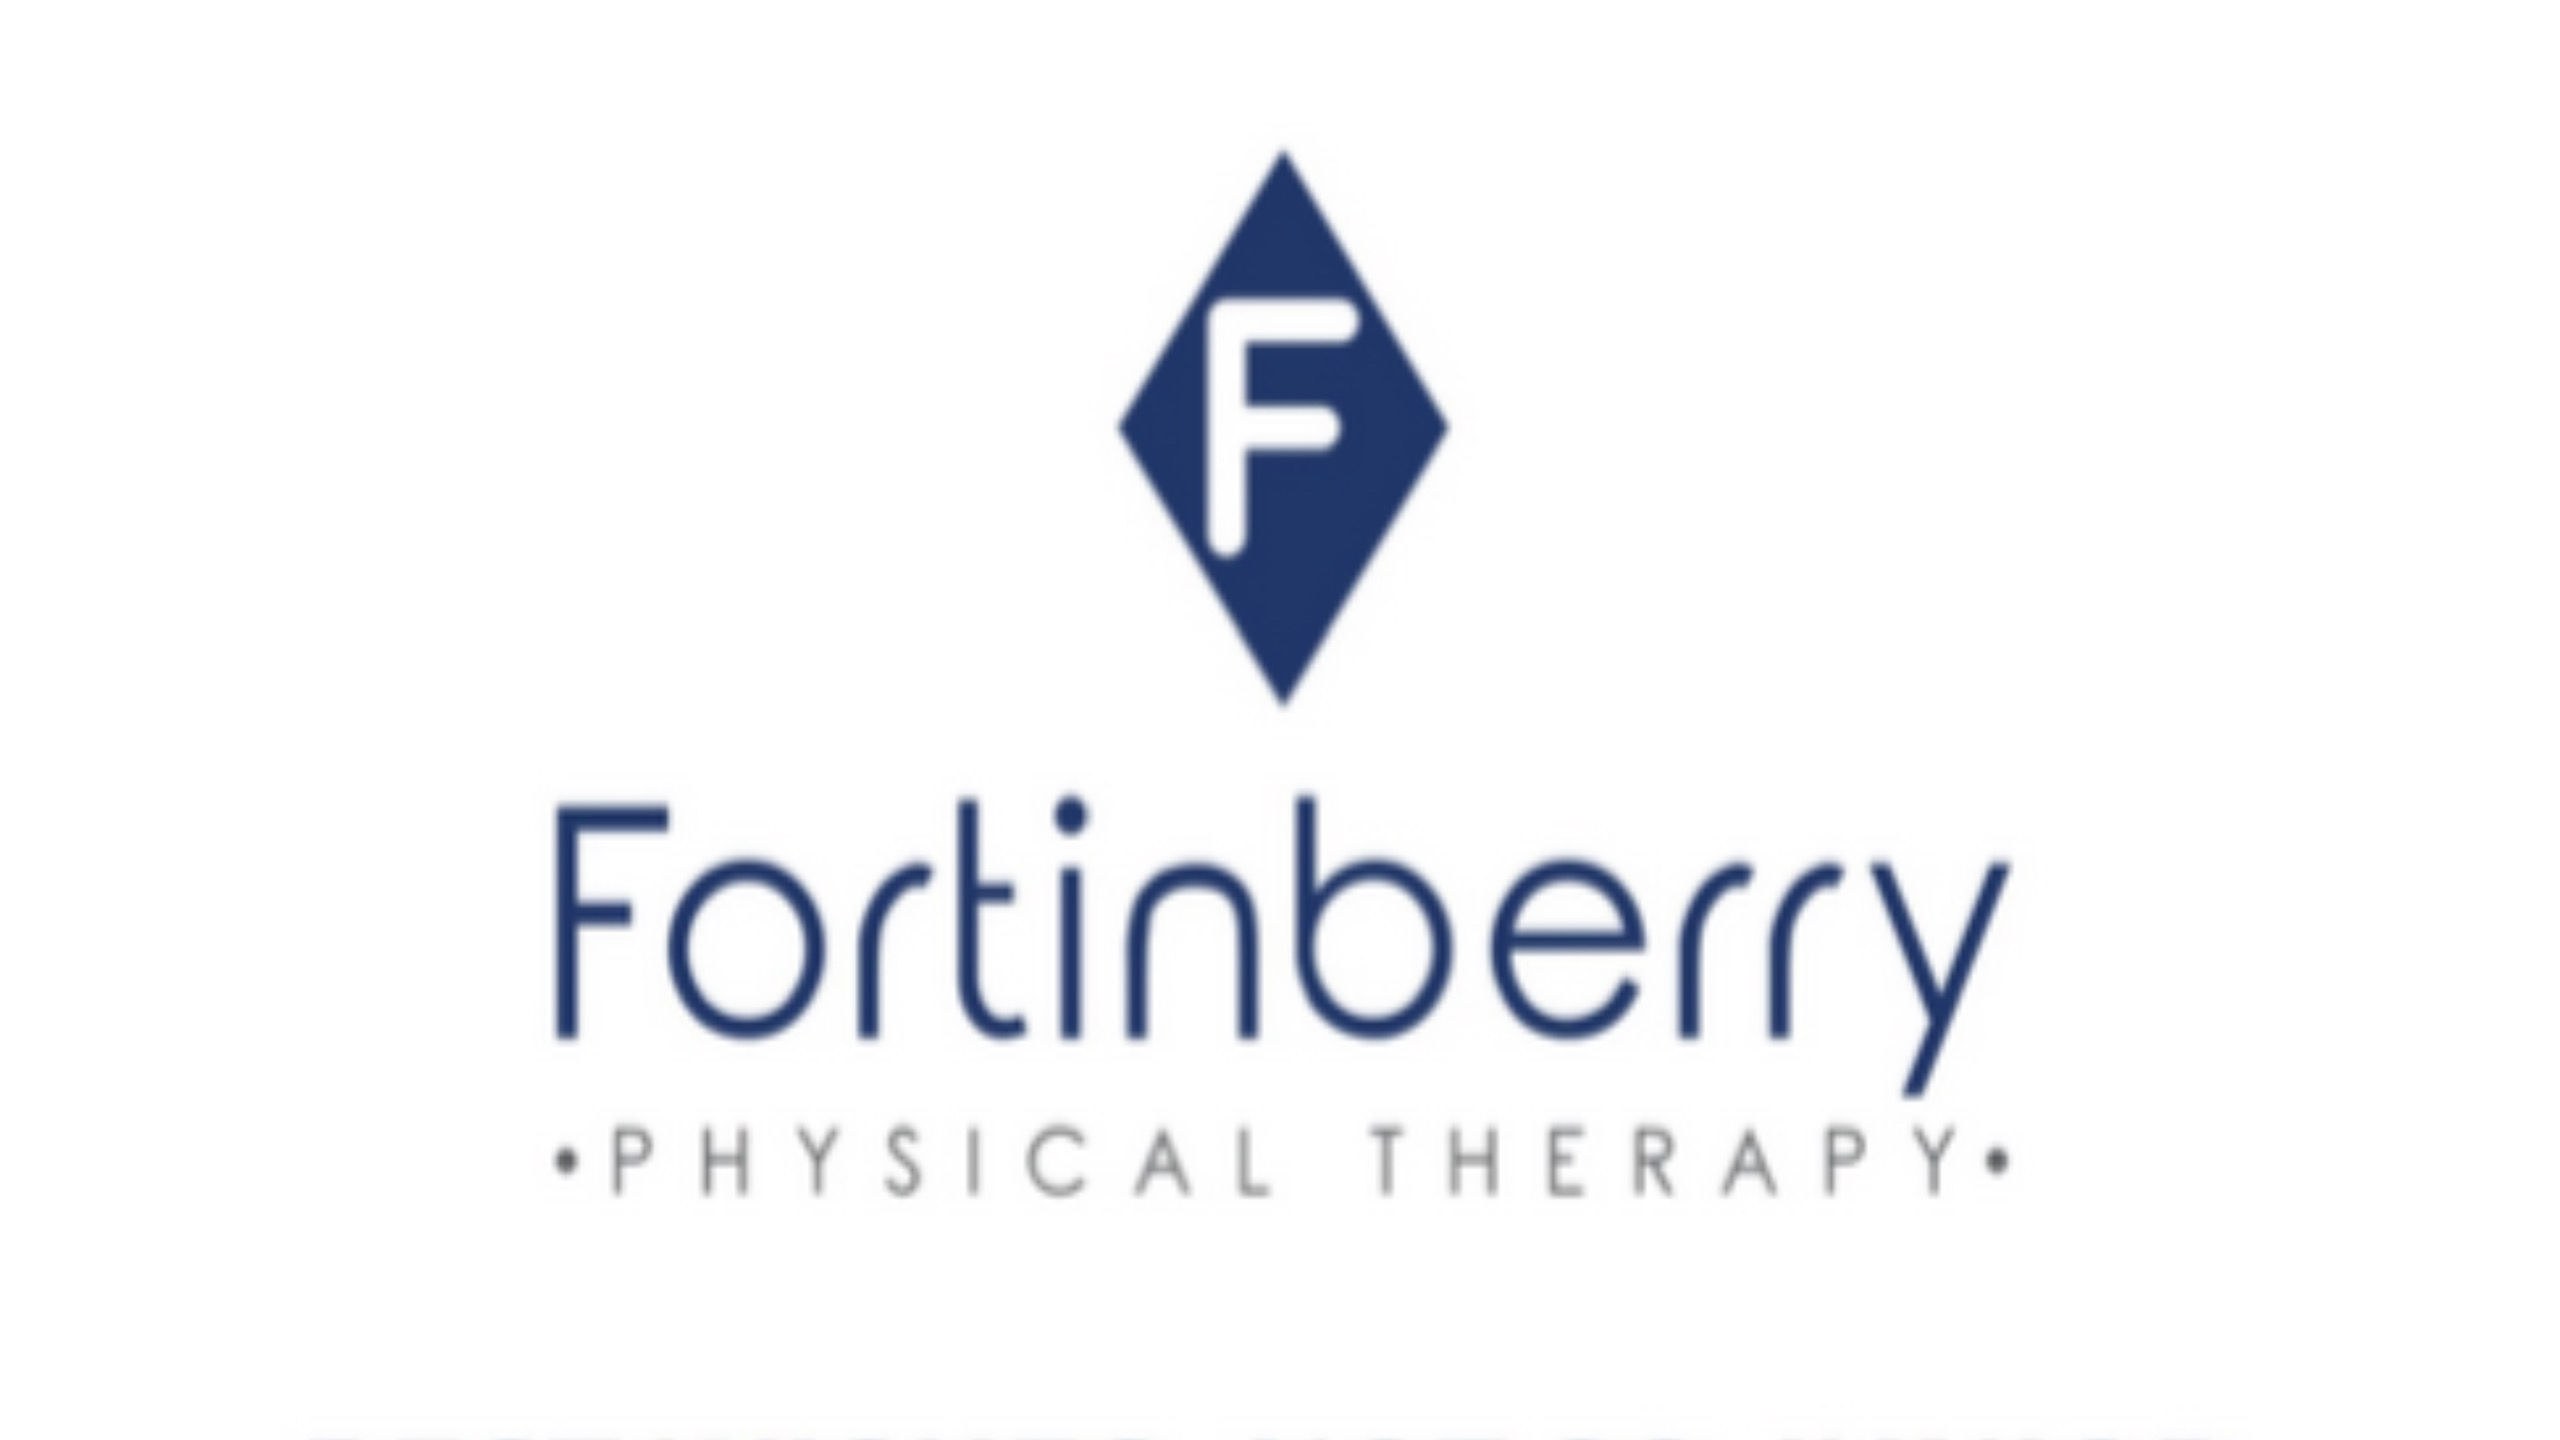 Fortinberry Physical Therapy